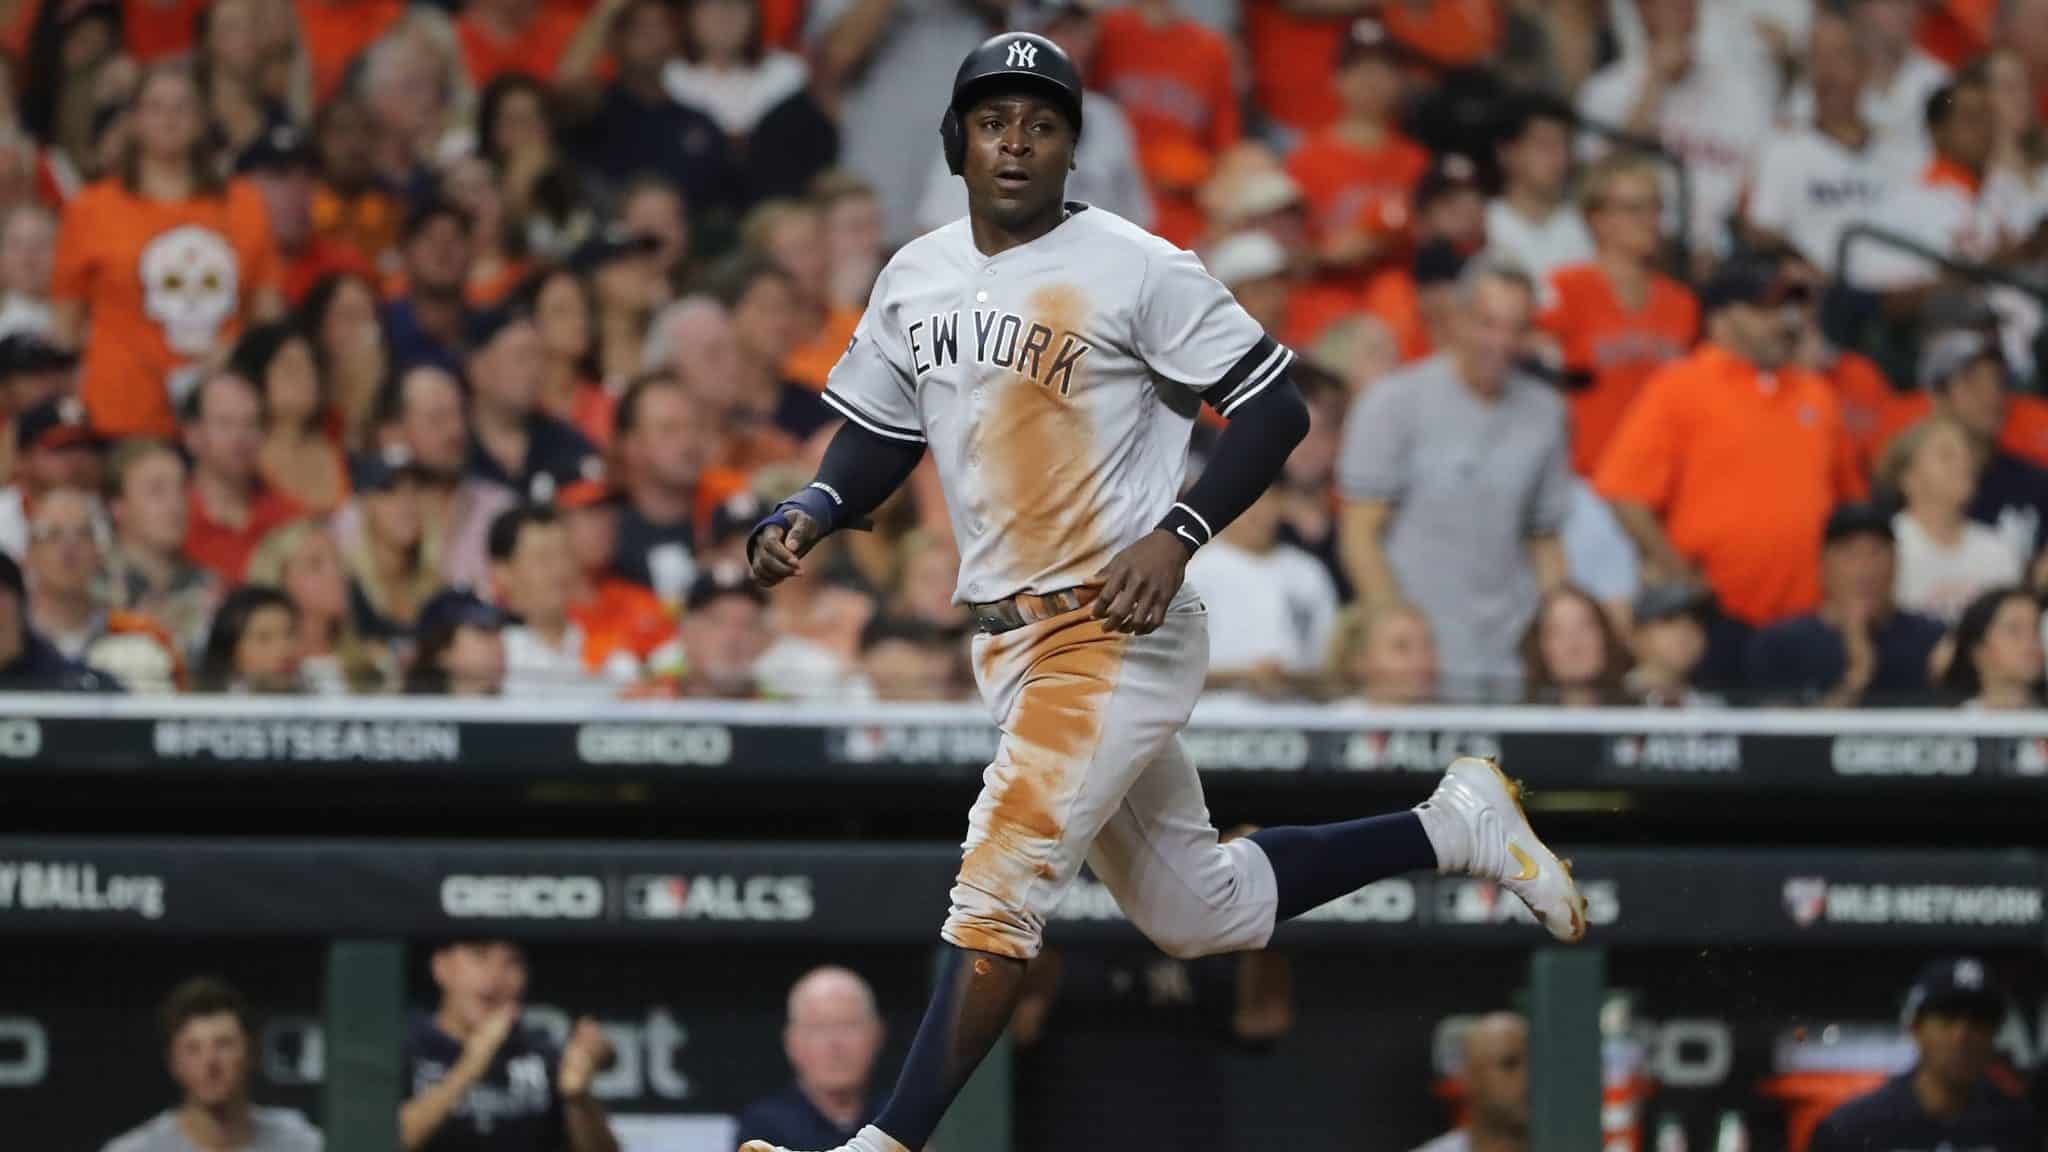 HOUSTON, TEXAS - OCTOBER 19: Didi Gregorius #18 of the New York Yankees scores a run against the Houston Astros during the second inning in game six of the American League Championship Series at Minute Maid Park on October 19, 2019 in Houston, Texas.